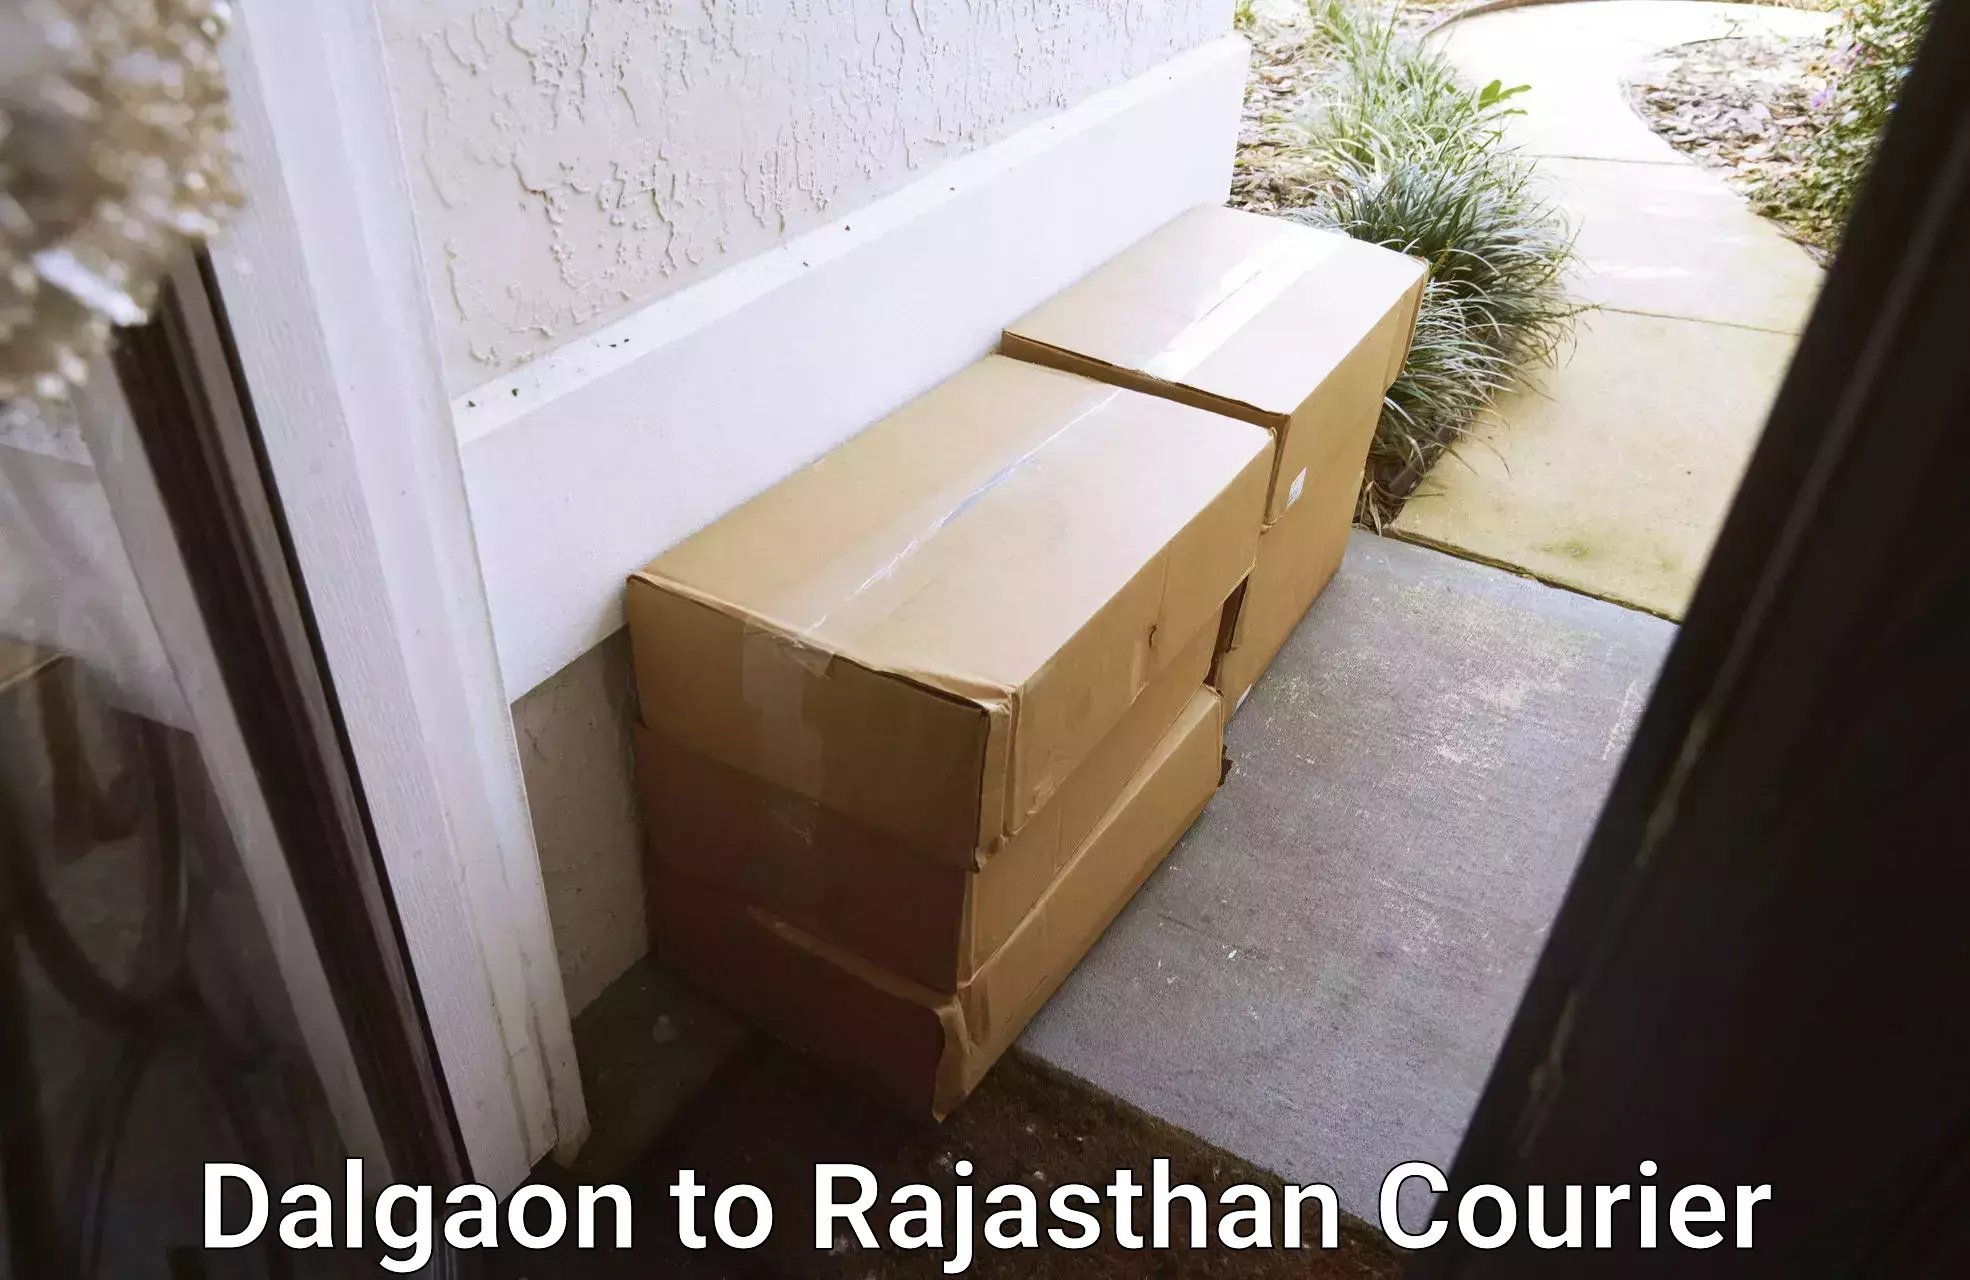 High-speed parcel service Dalgaon to Yeswanthapur